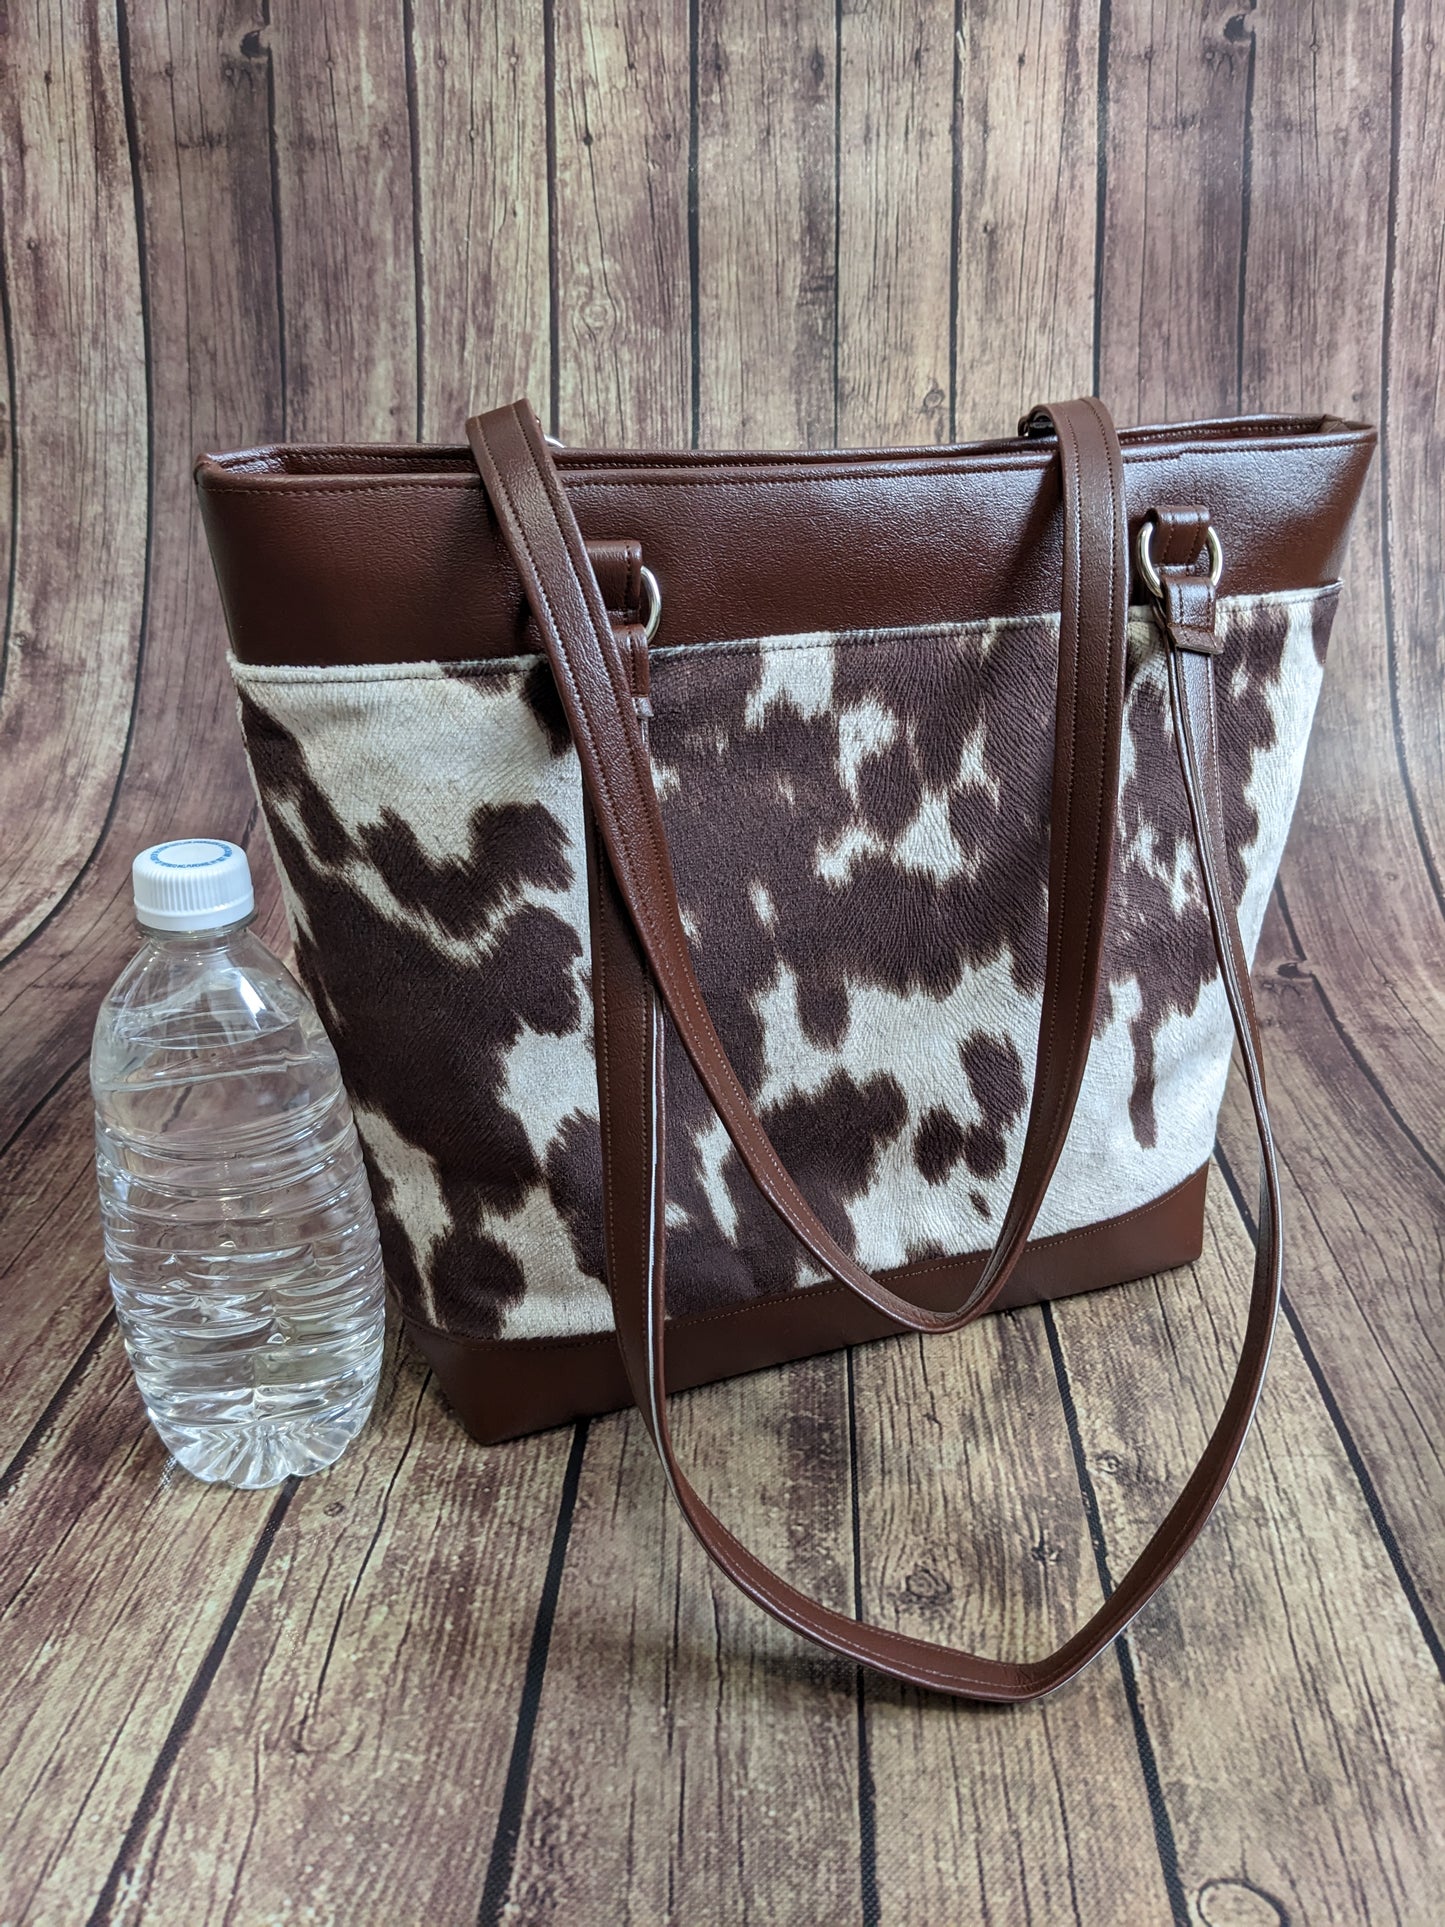 Camela Stylish Mid-Sized Handbag [Cowhide]: Spacious Style for Every Occasion